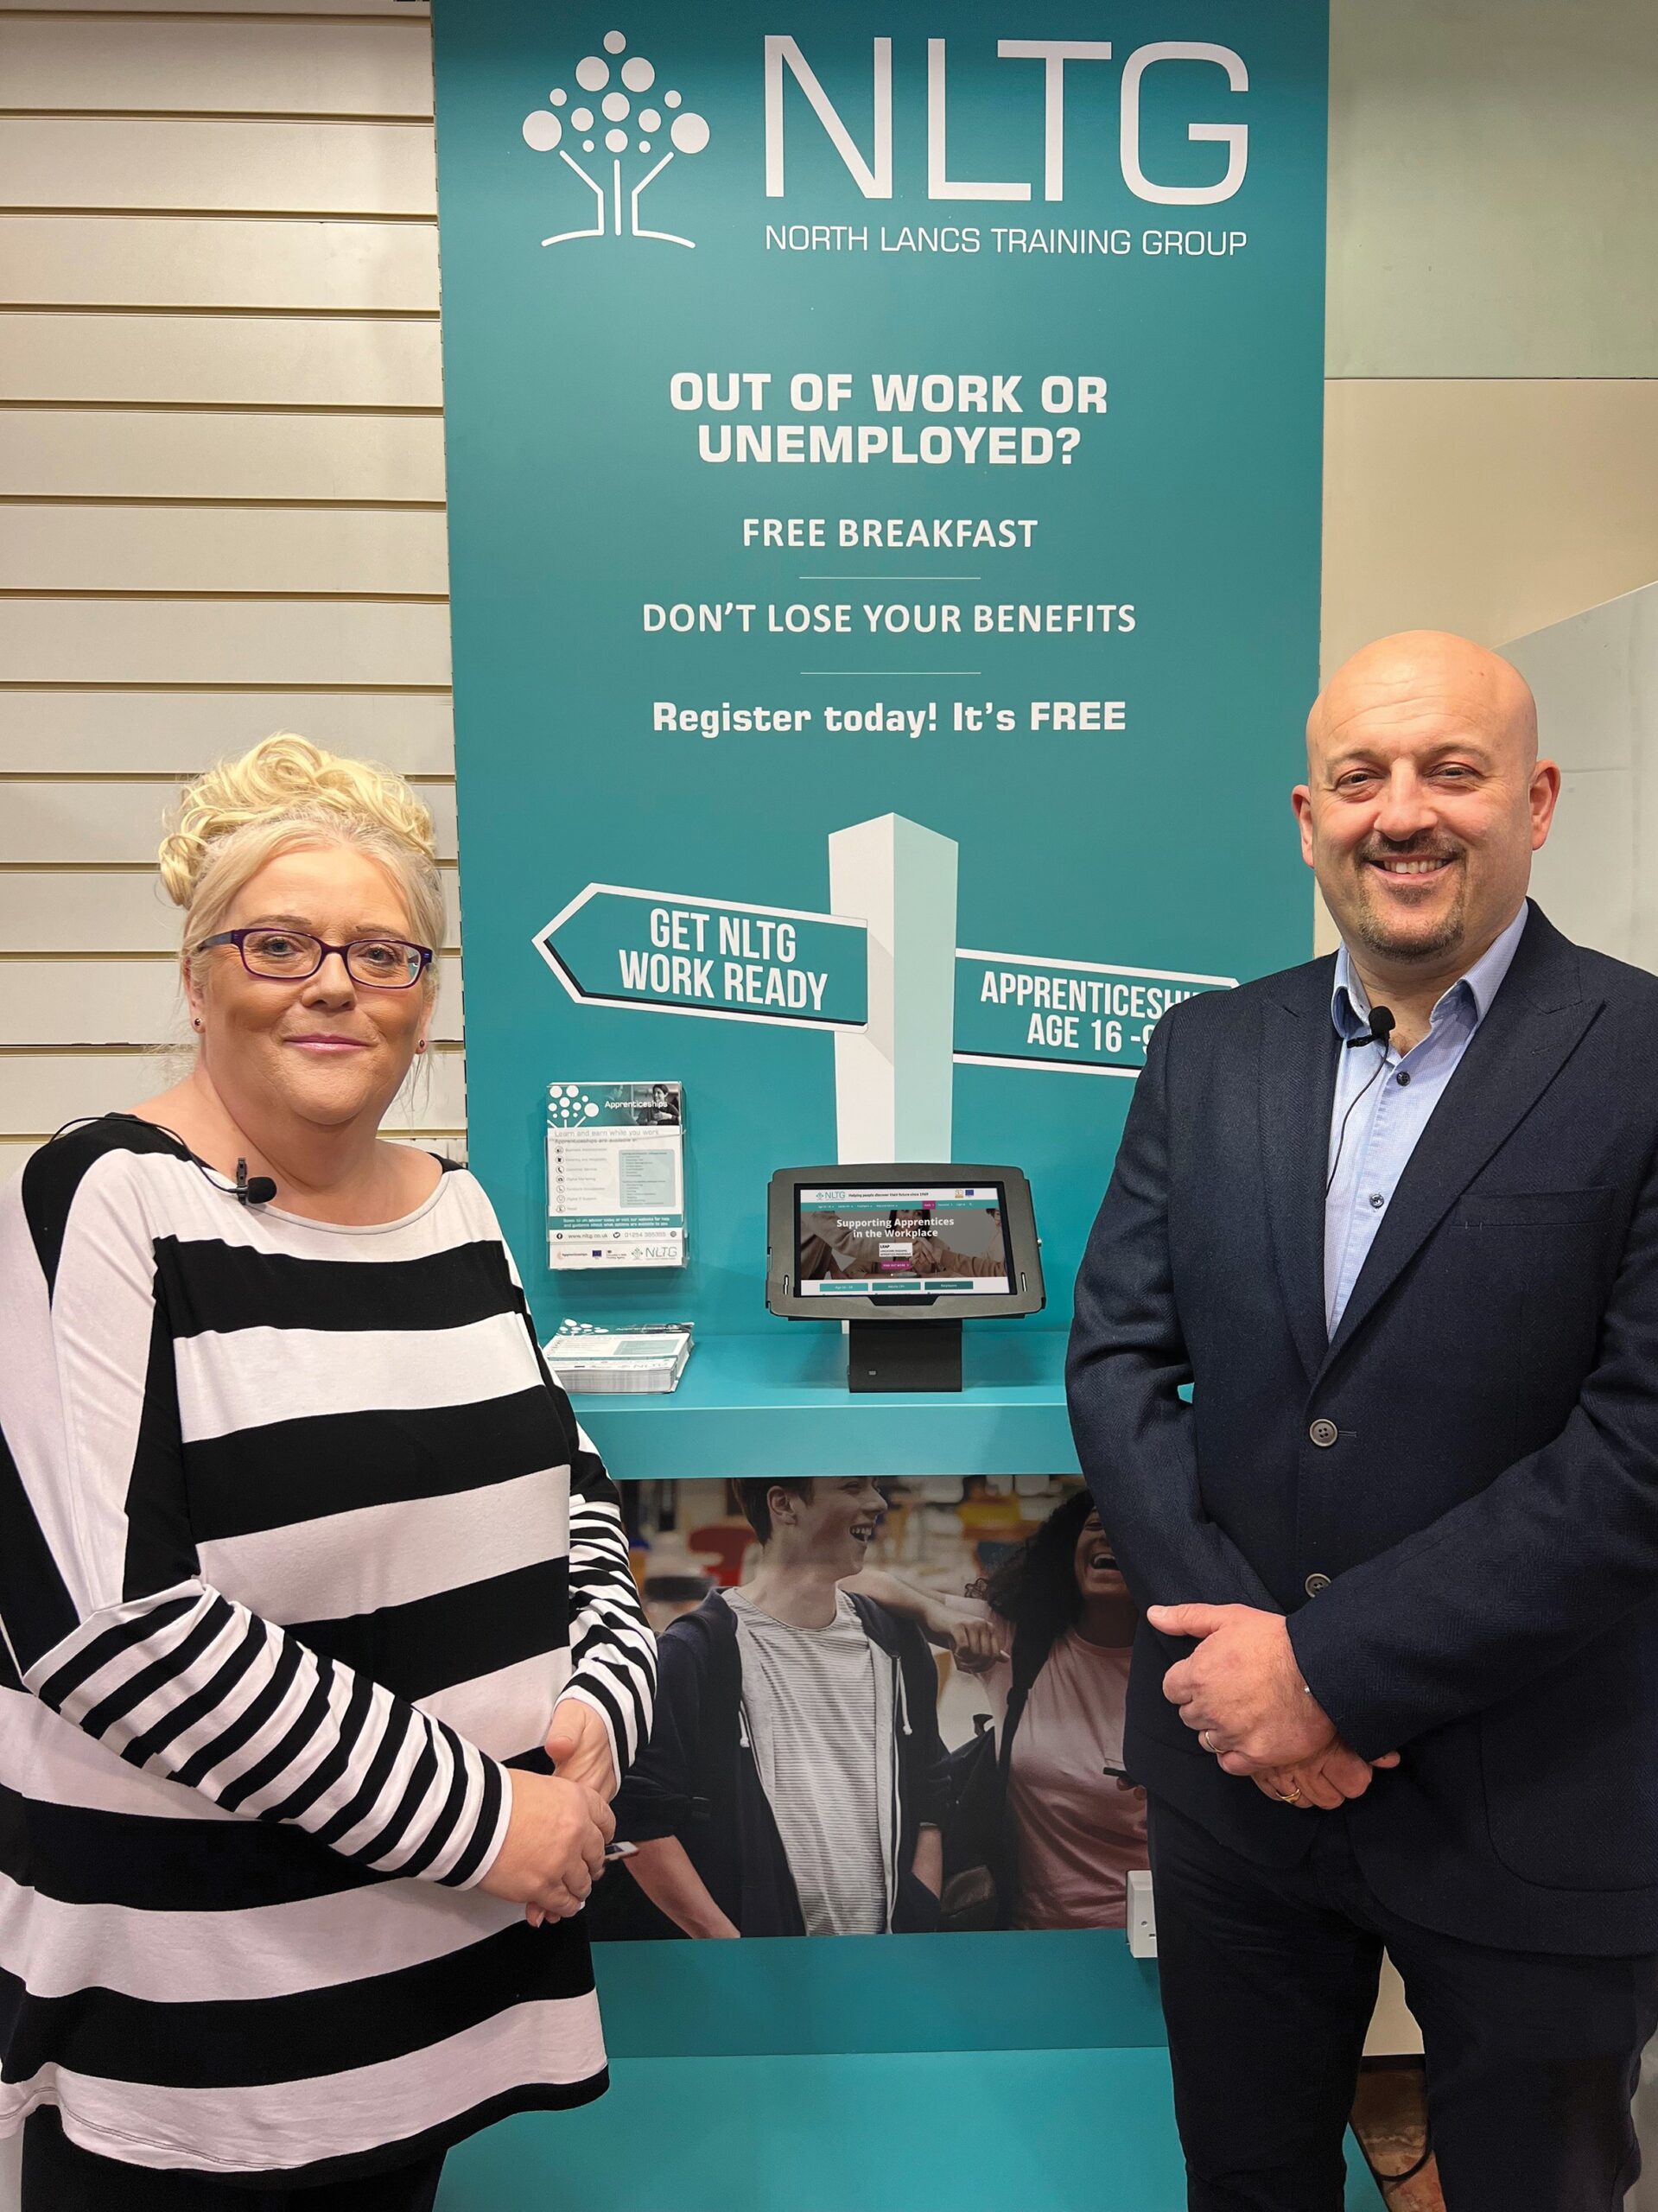 North Lancs Training Group launch flagship pilot scheme with Hyndburn Food Pantry to get more people into work and apprenticeships